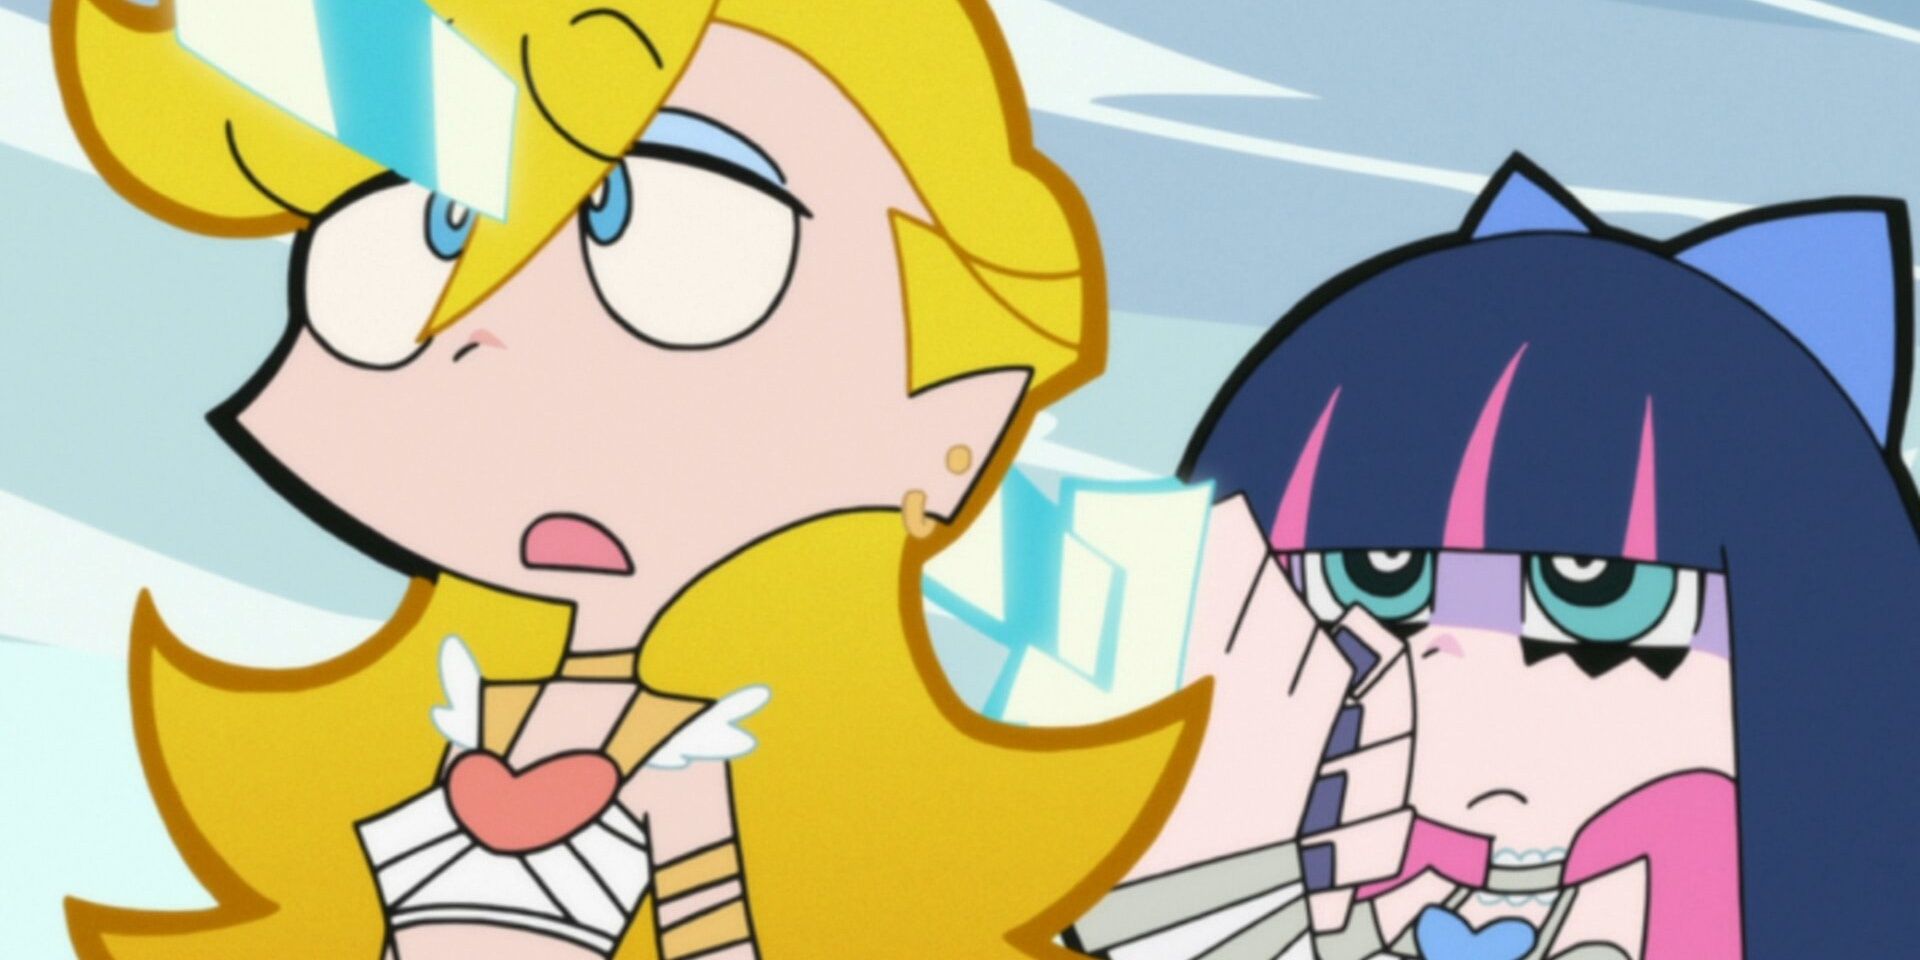 Stocking betrays Panty in Panty and Stocking ending scene